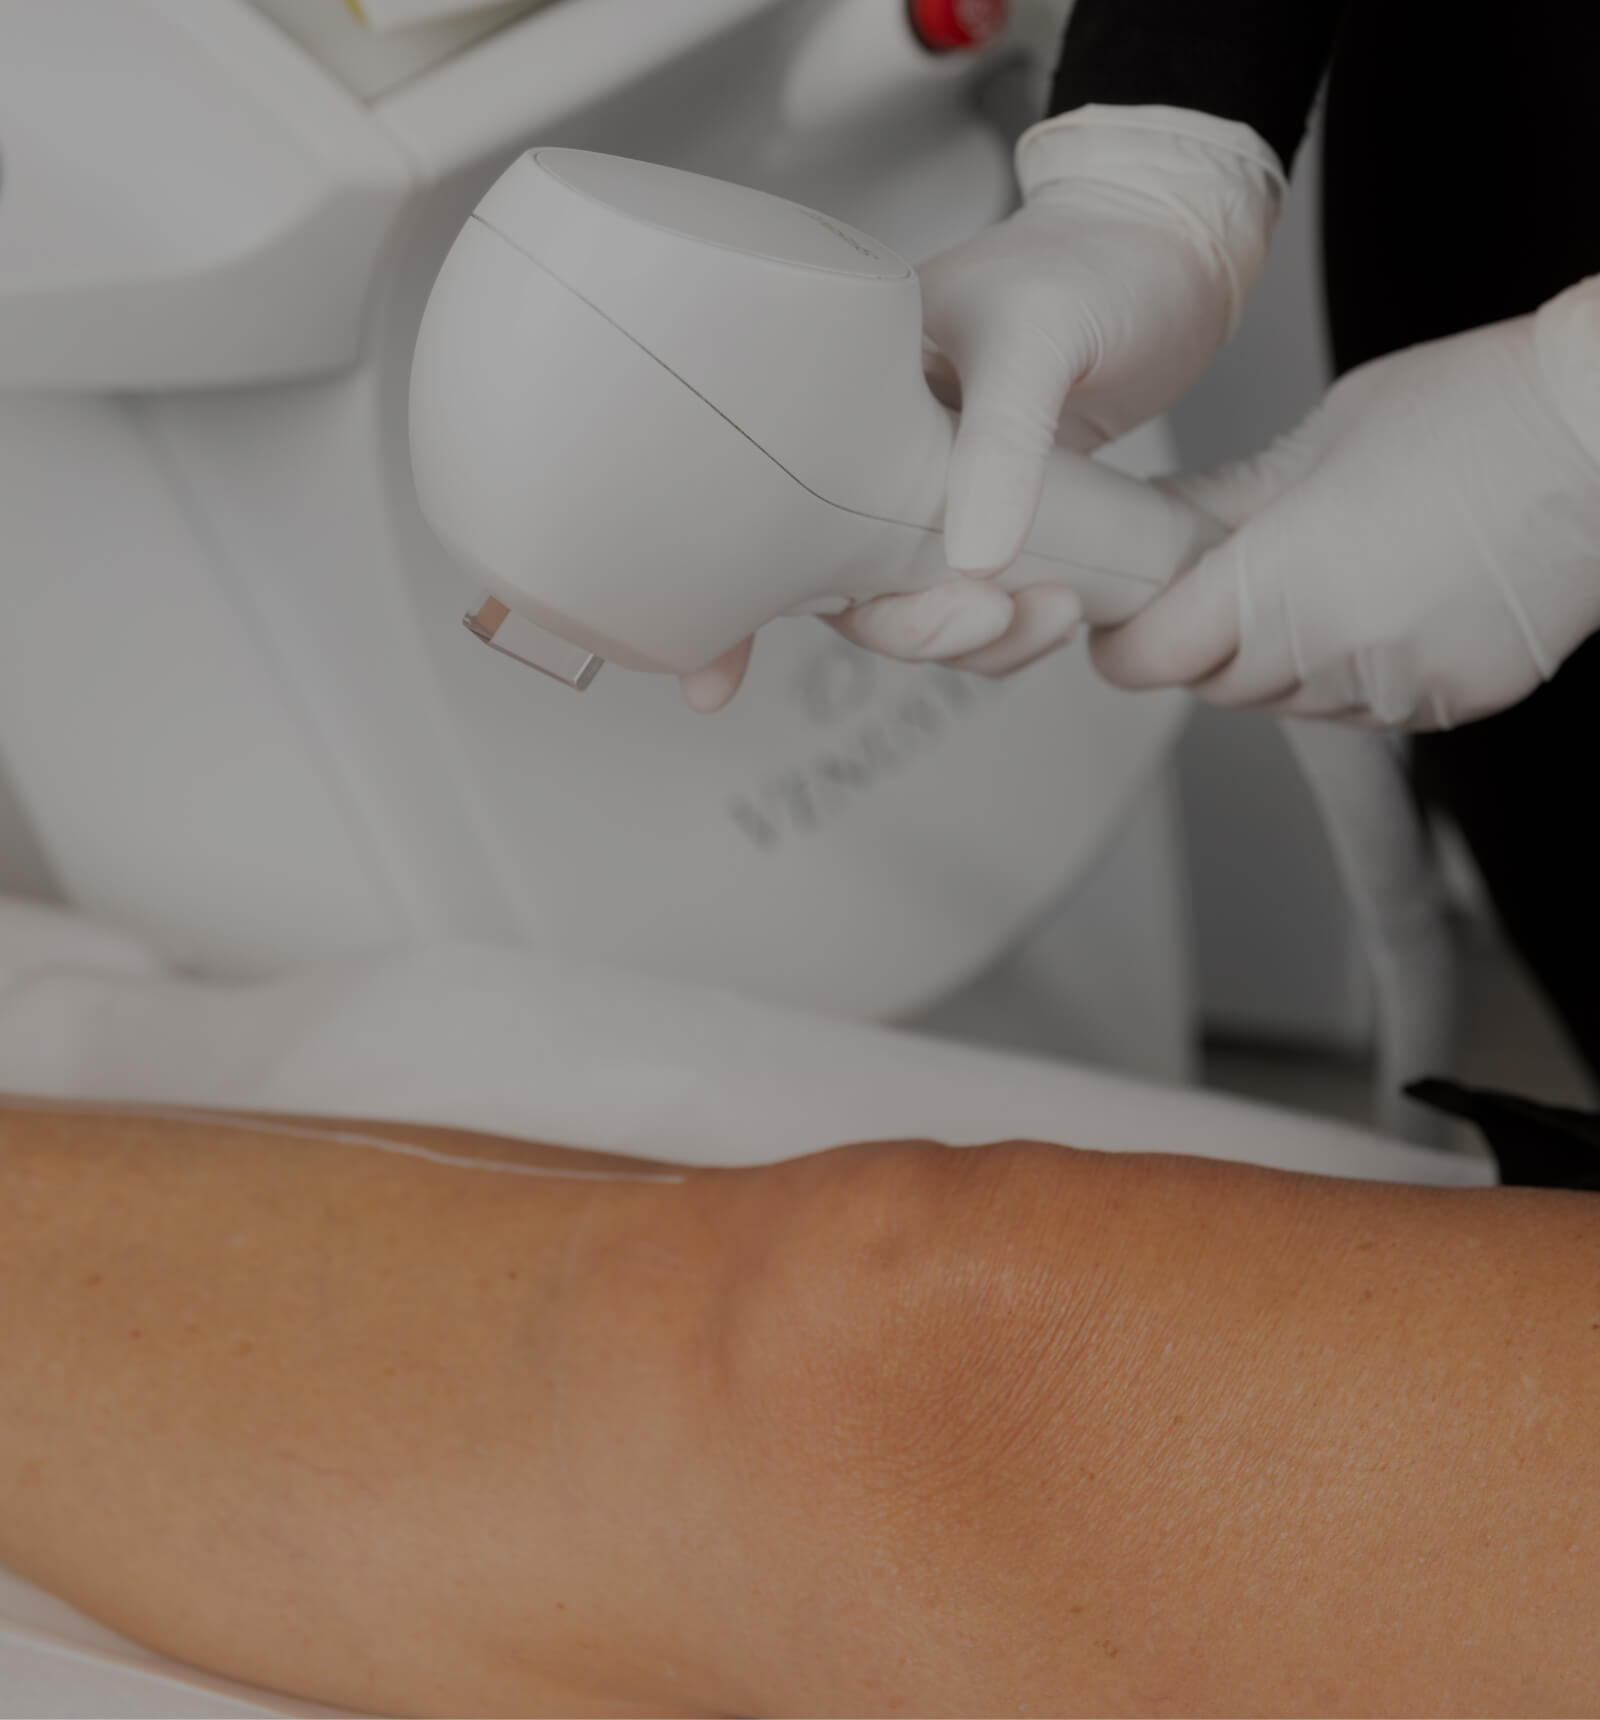 A medical aesthetic technician from Clinique Chloé preparing to perform permanent IPL hair removal on a patient's leg